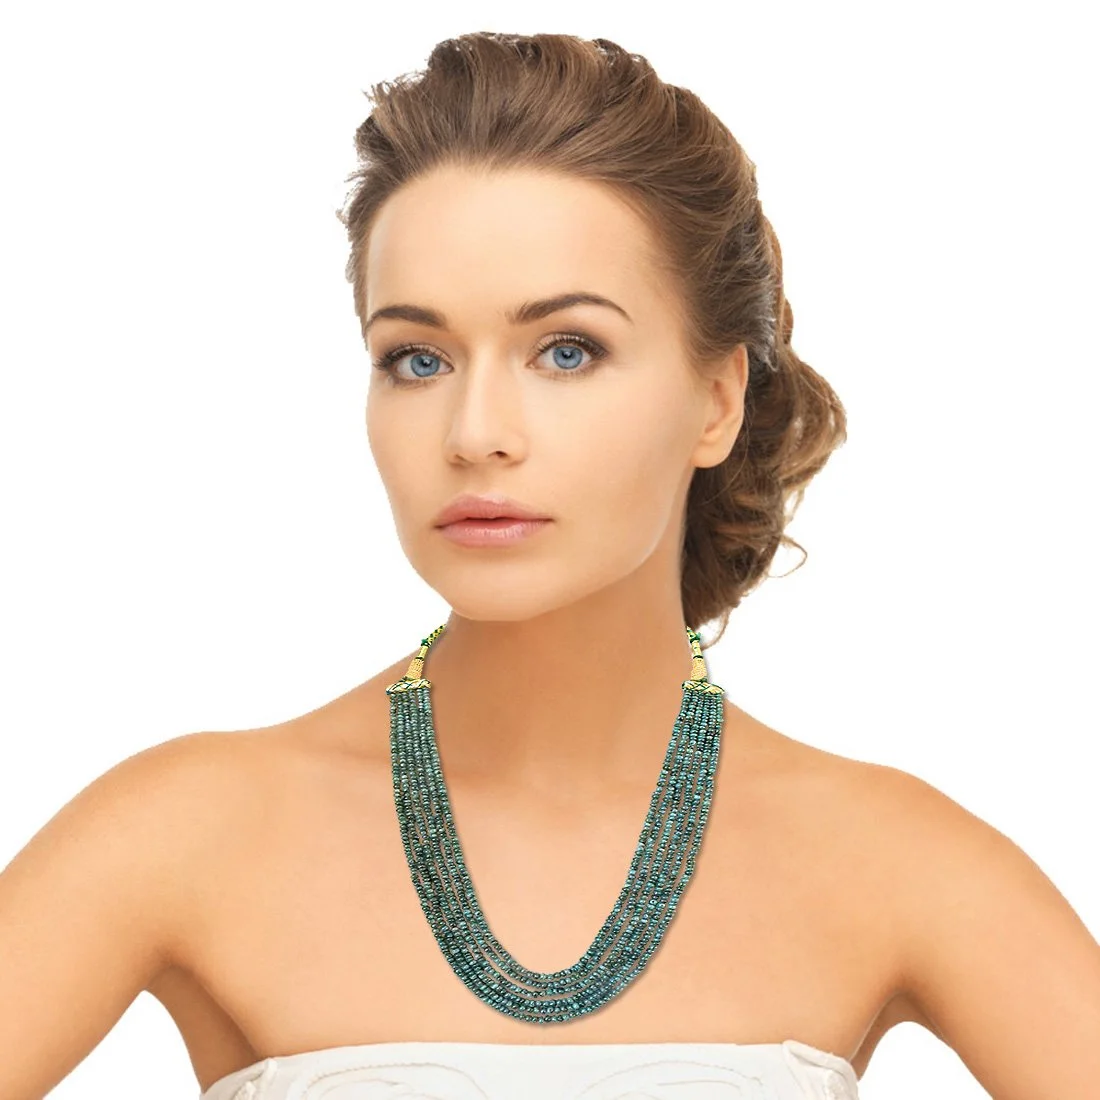 6 Line 290cts REAL Natural Green Emerald Beads Necklace for Women (290cts EMR Neck)